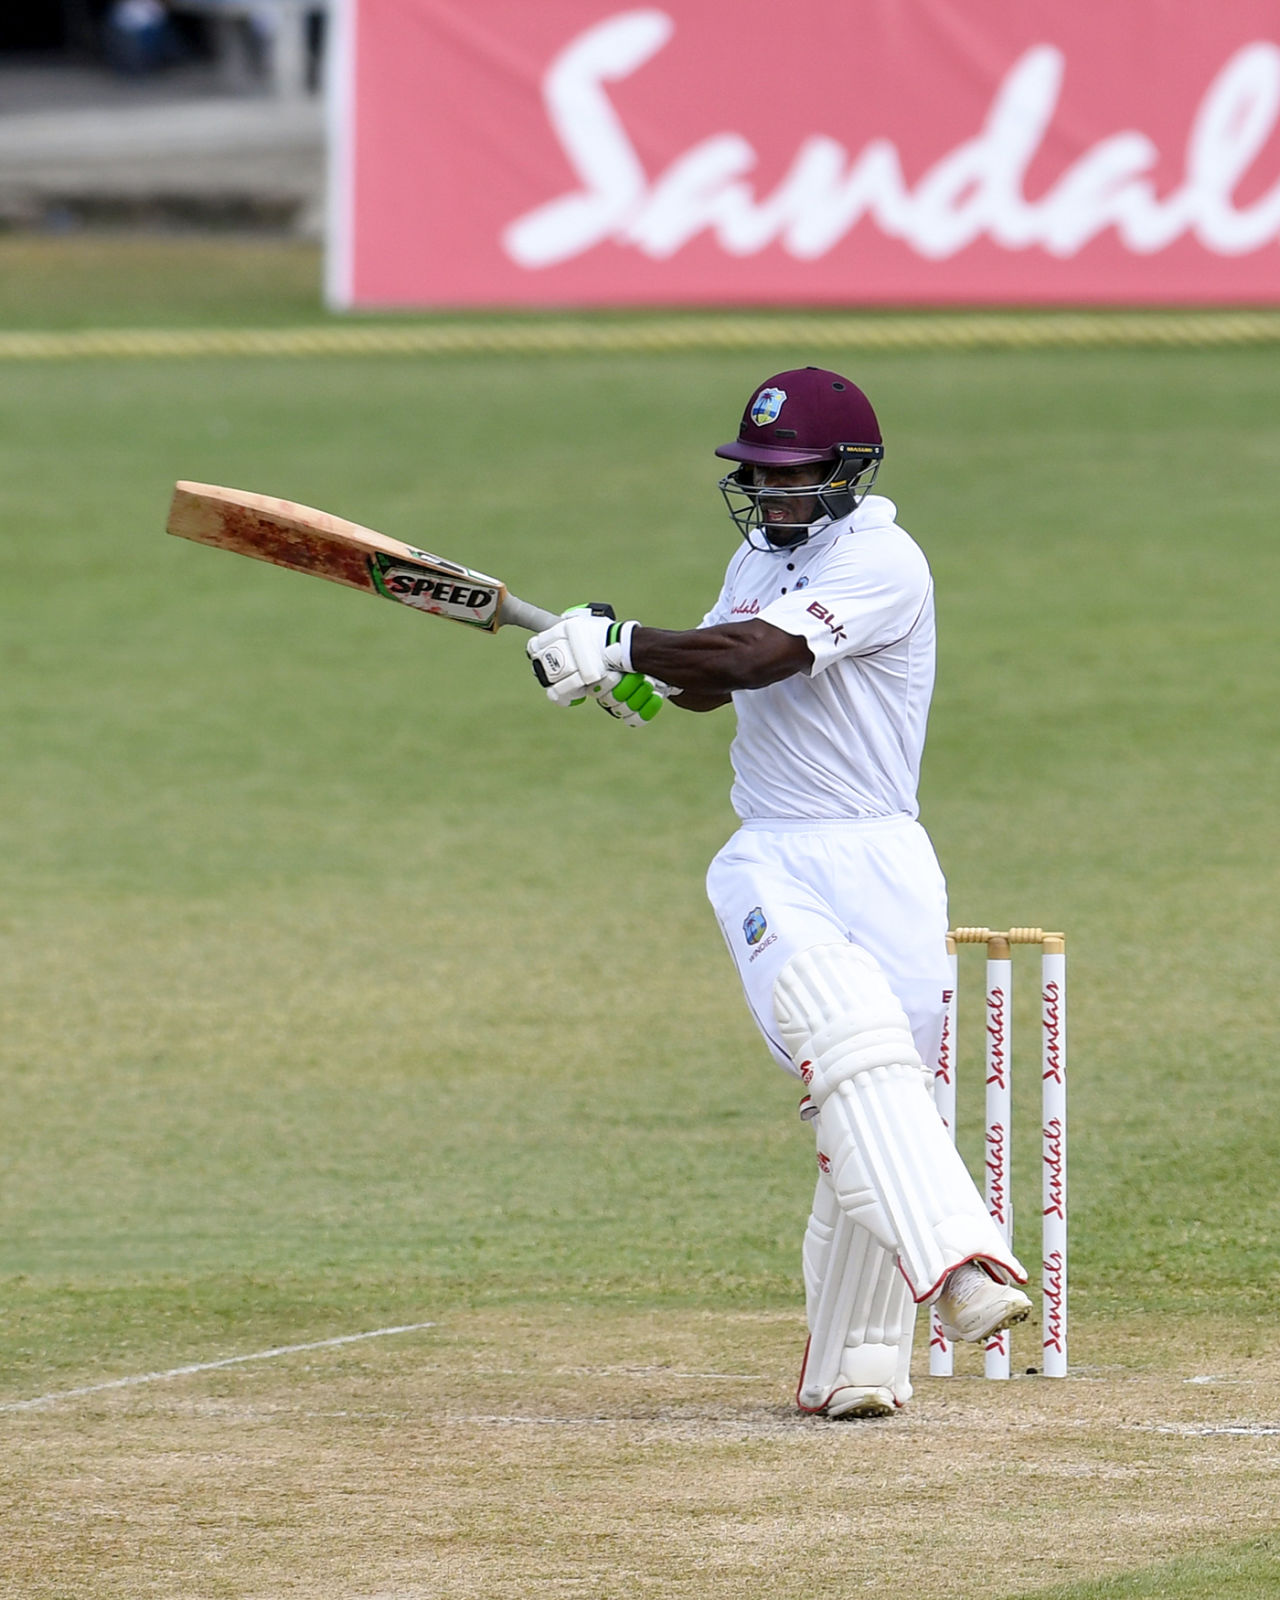 Devon Smith whips one off his hips, West Indies v Sri Lanka, 2nd Test, Gros Islet, 2nd day, June 15, 2018